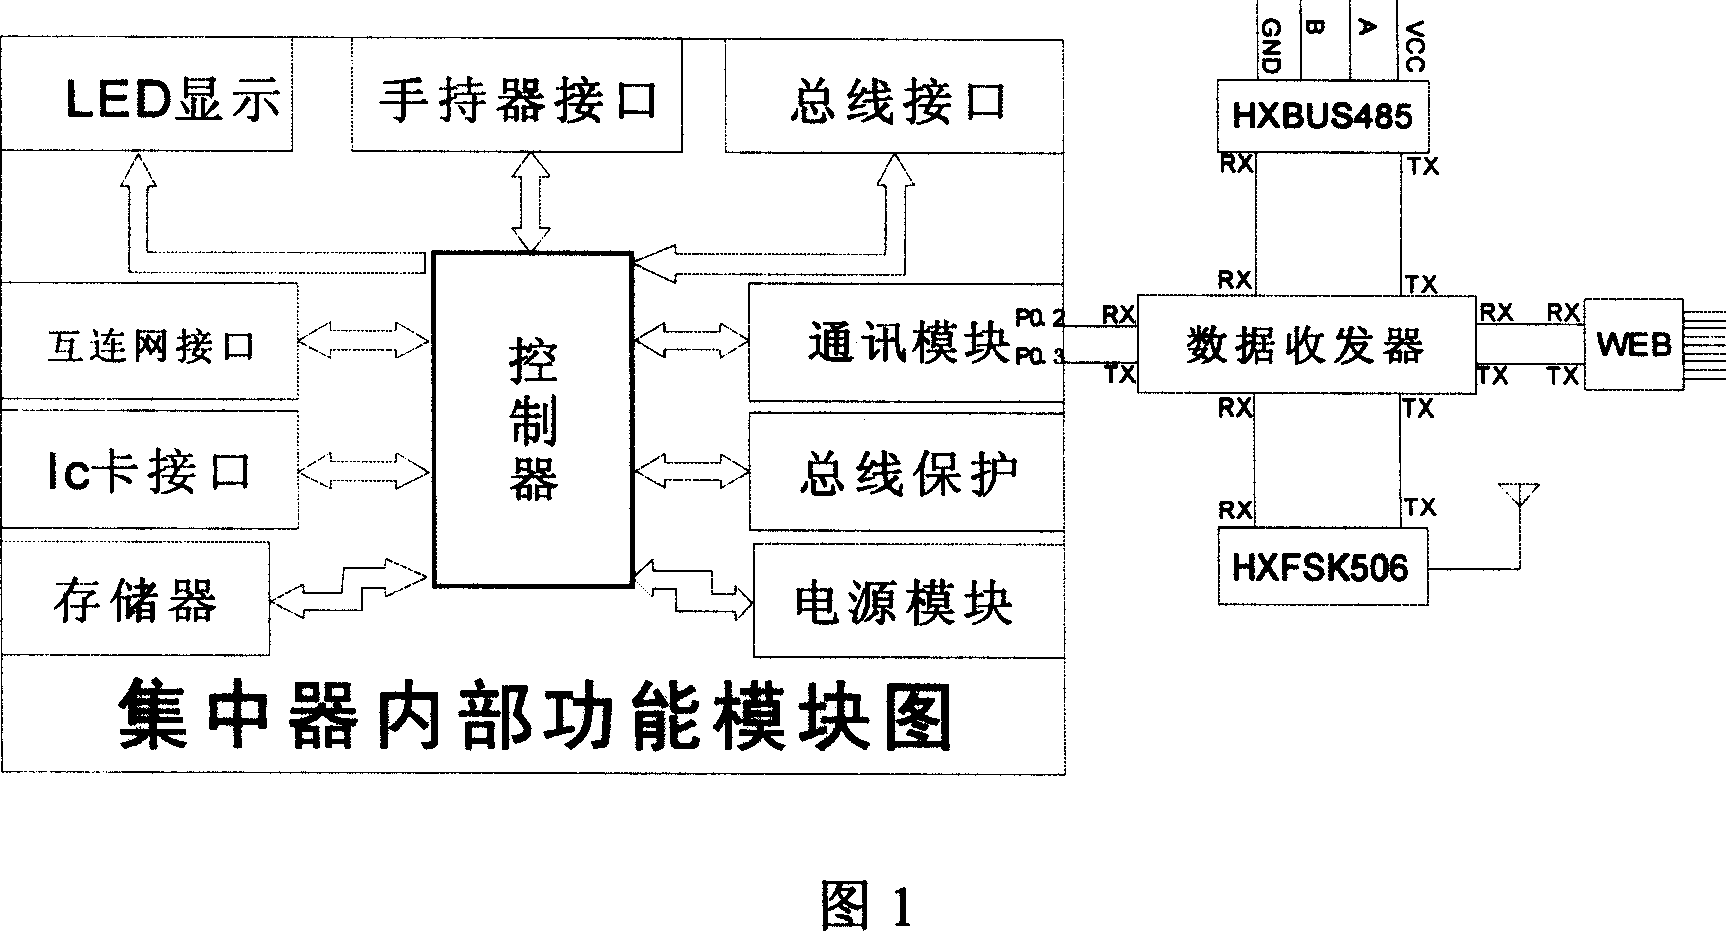 Concentrator in data-transmission network water meter